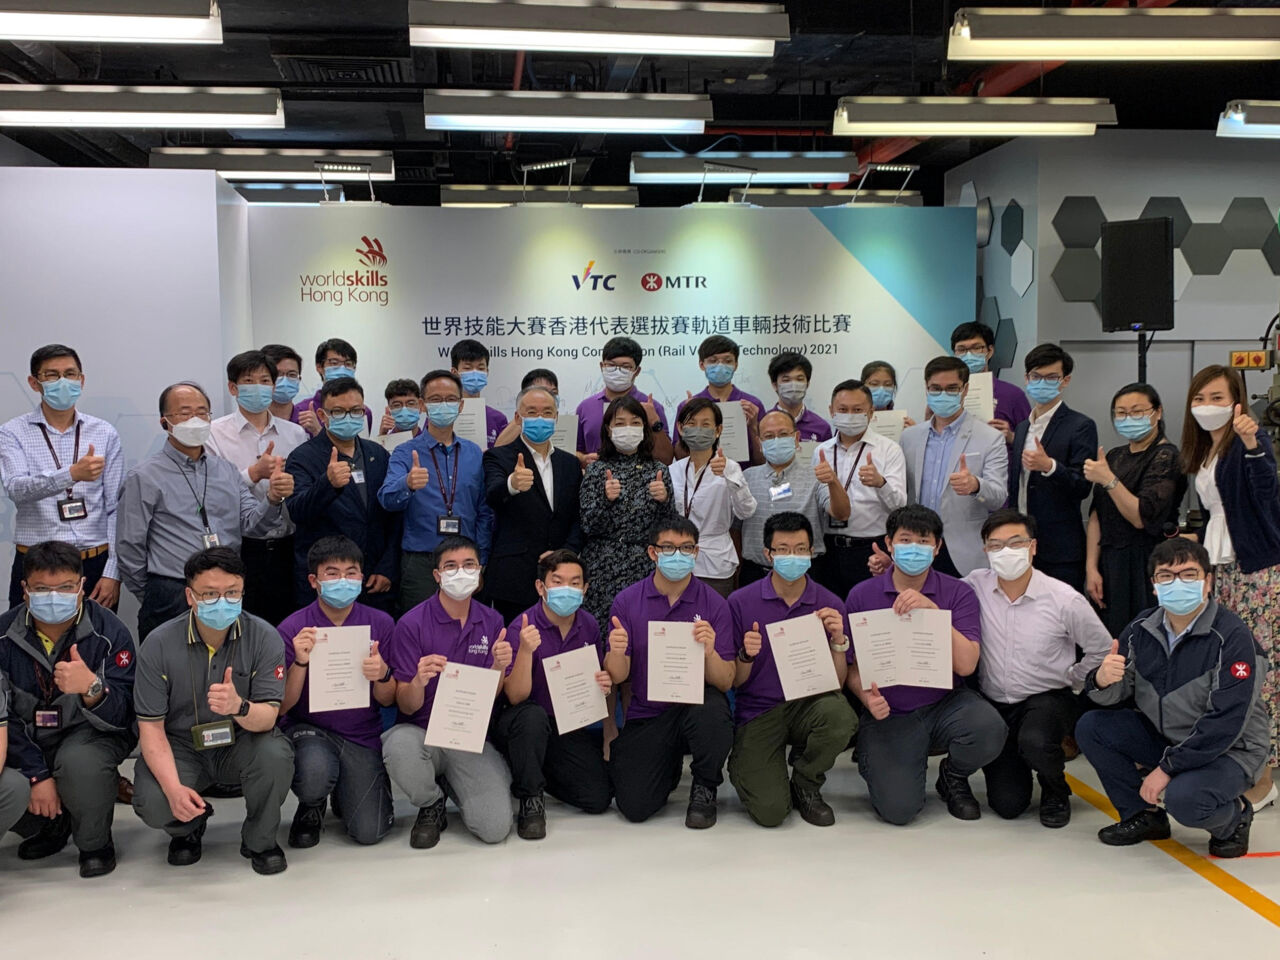 Competitors and experts pose with certificates at the end of the Rail Vehicle Technology competition in Hong Kong in May 2021.
